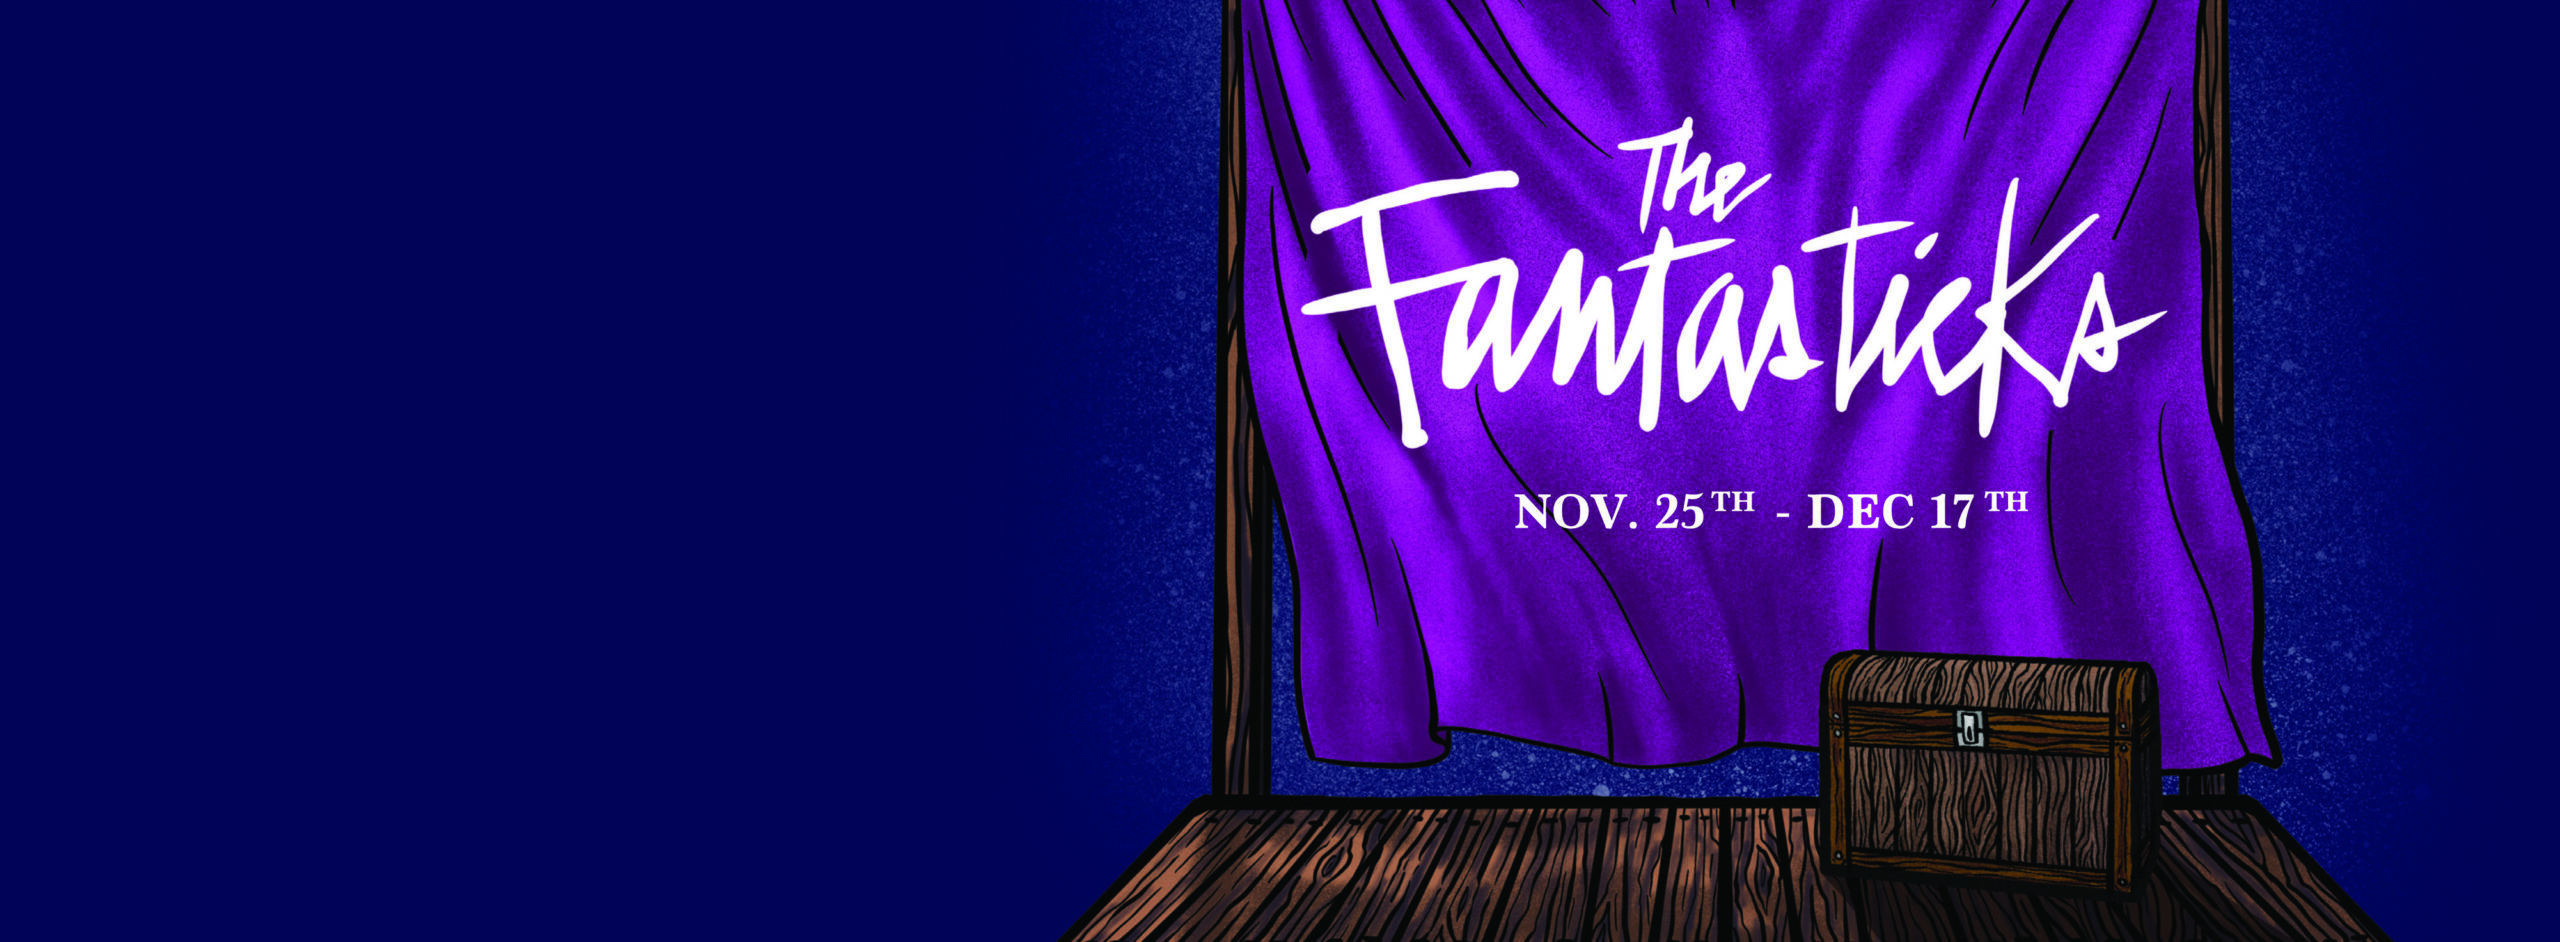 Open Auditions for “The Fantasticks” at Pentacle Theatre